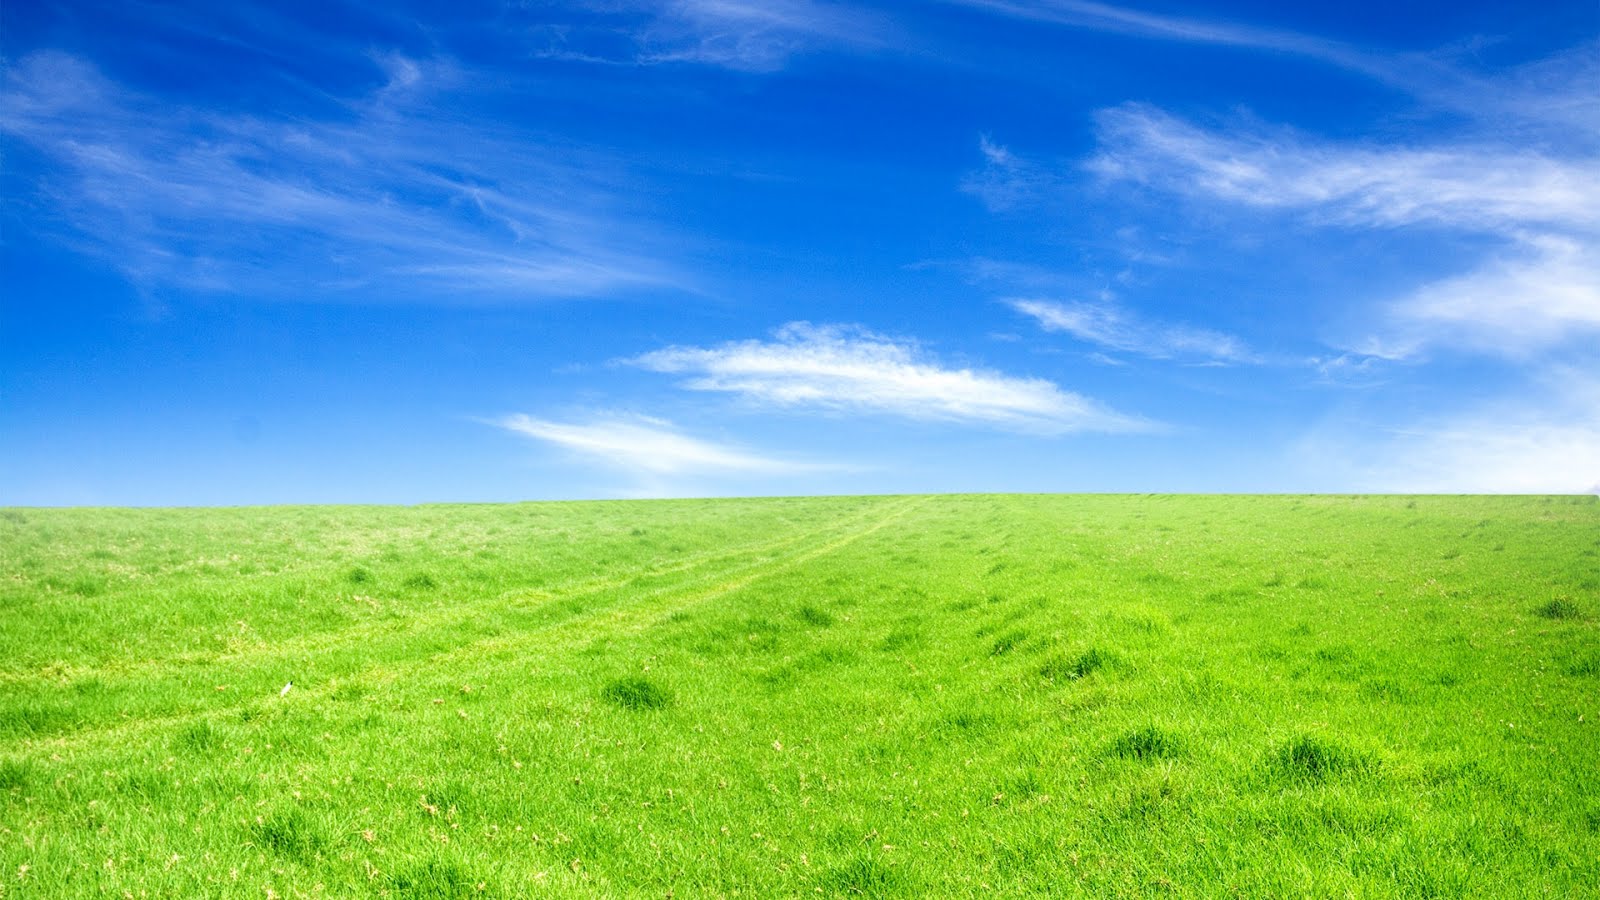 Sky Grass Field Free PPT Backgrounds for your PowerPoint Templates